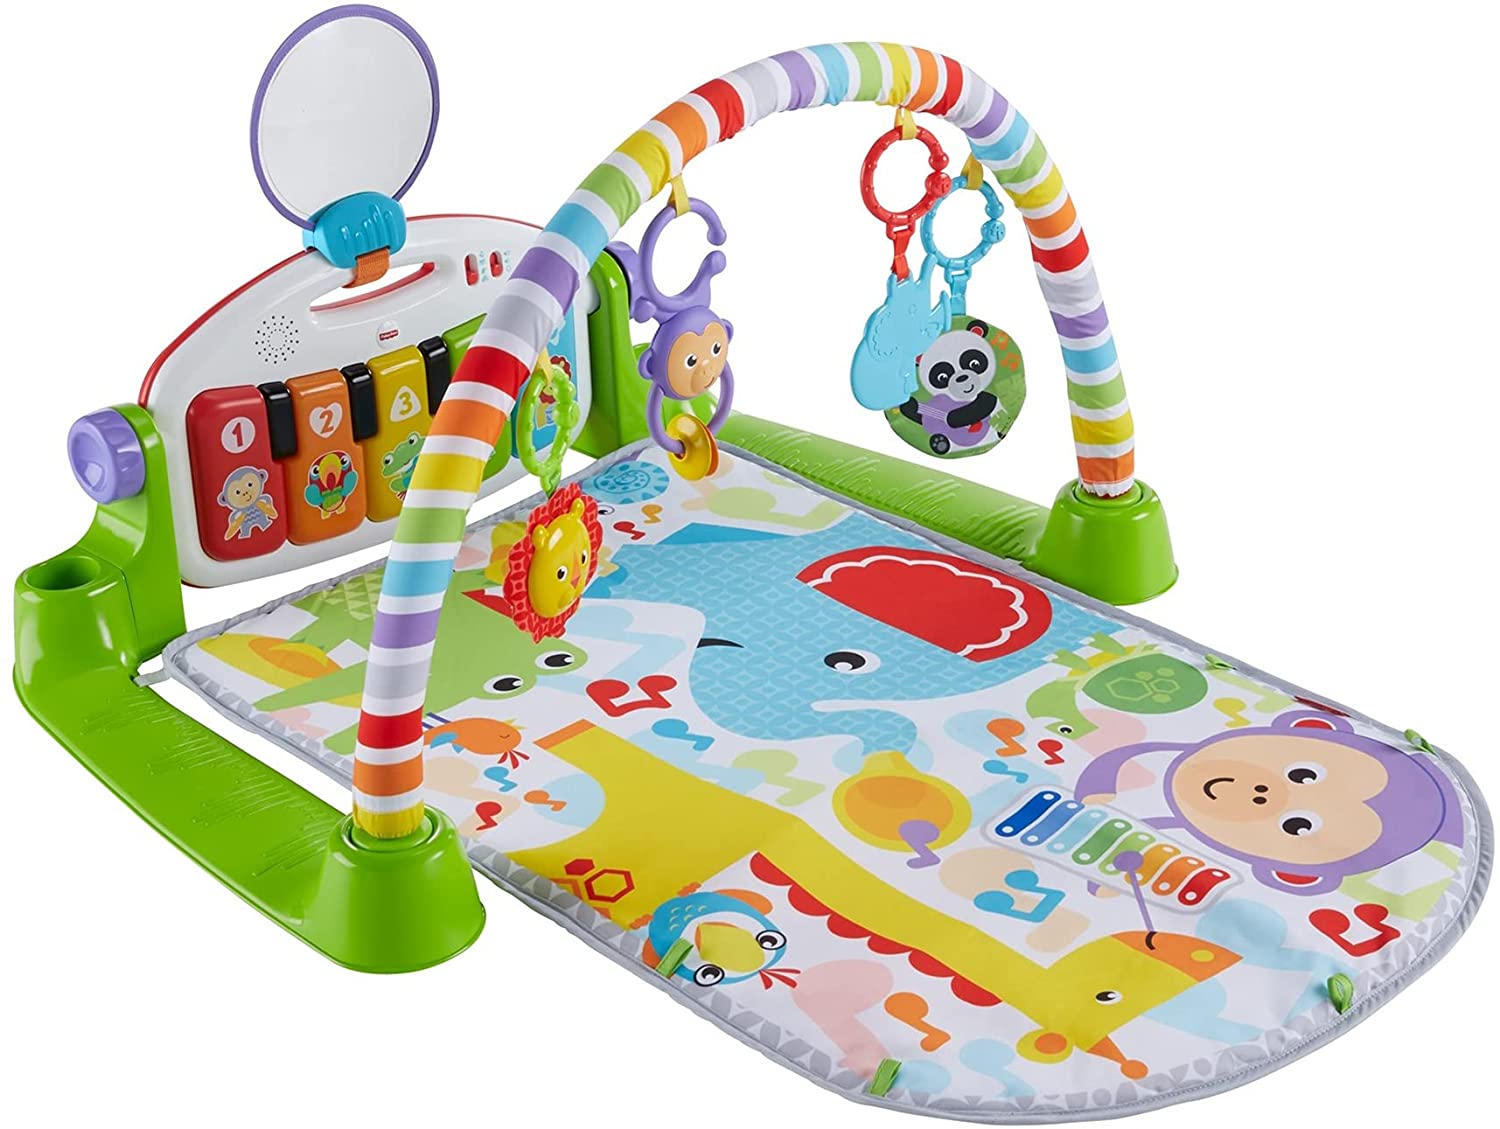 Fisher-Price Deluxe Kick 'n Play Piano Gym, Green, Gender Neutral